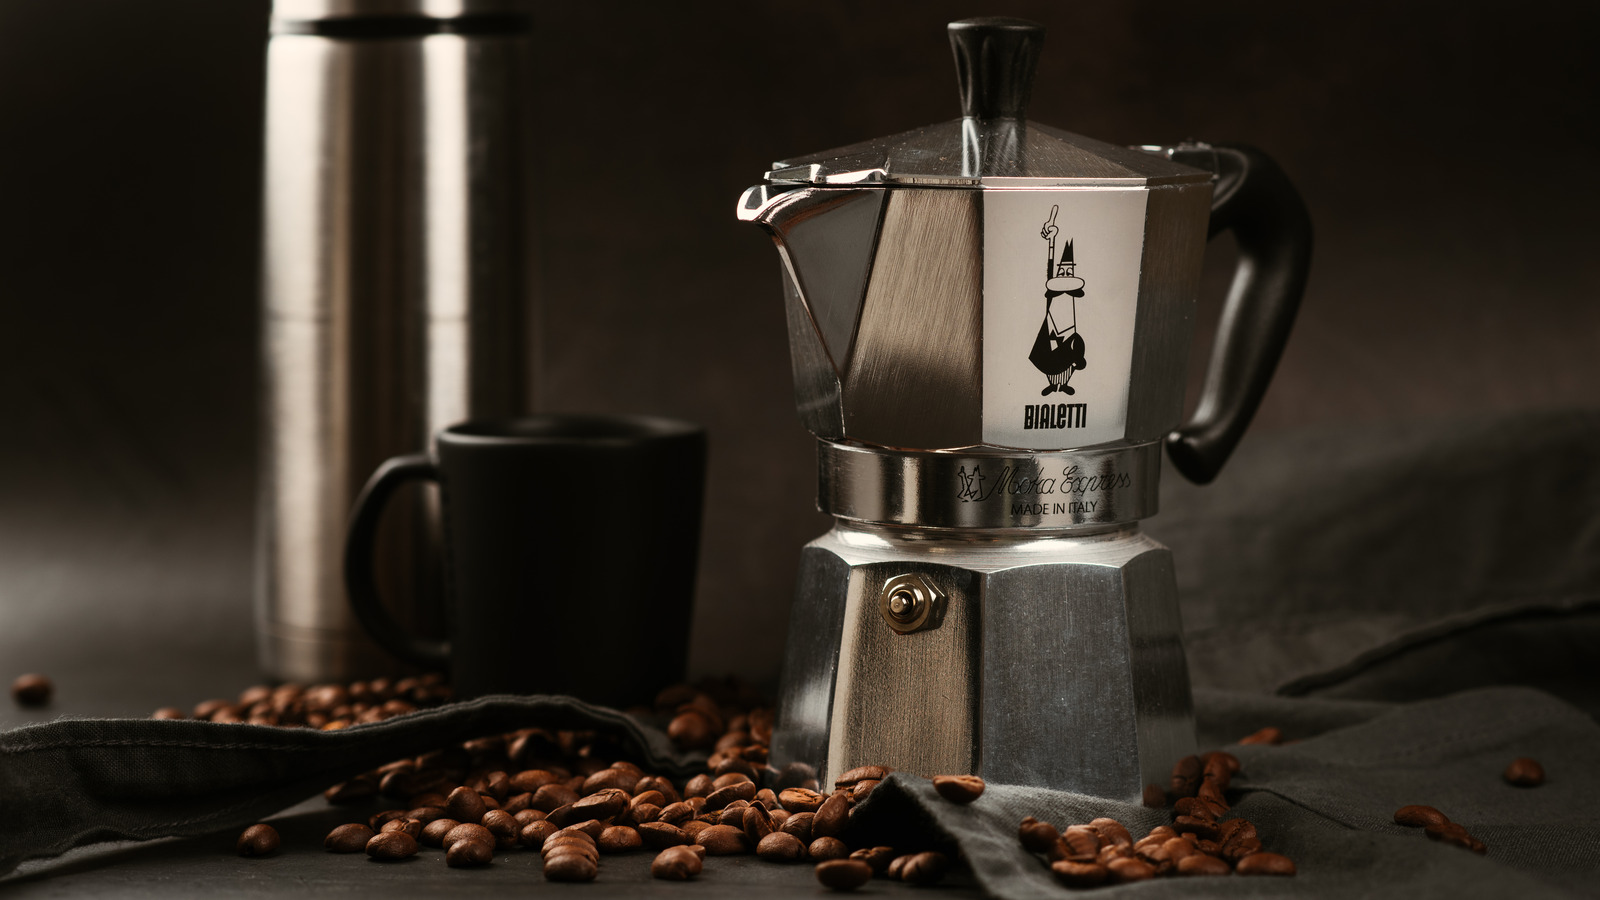 https://www.tastingtable.com/img/gallery/how-the-moka-pot-brought-freshly-brewed-espresso-into-the-home/l-intro-1668183284.jpg